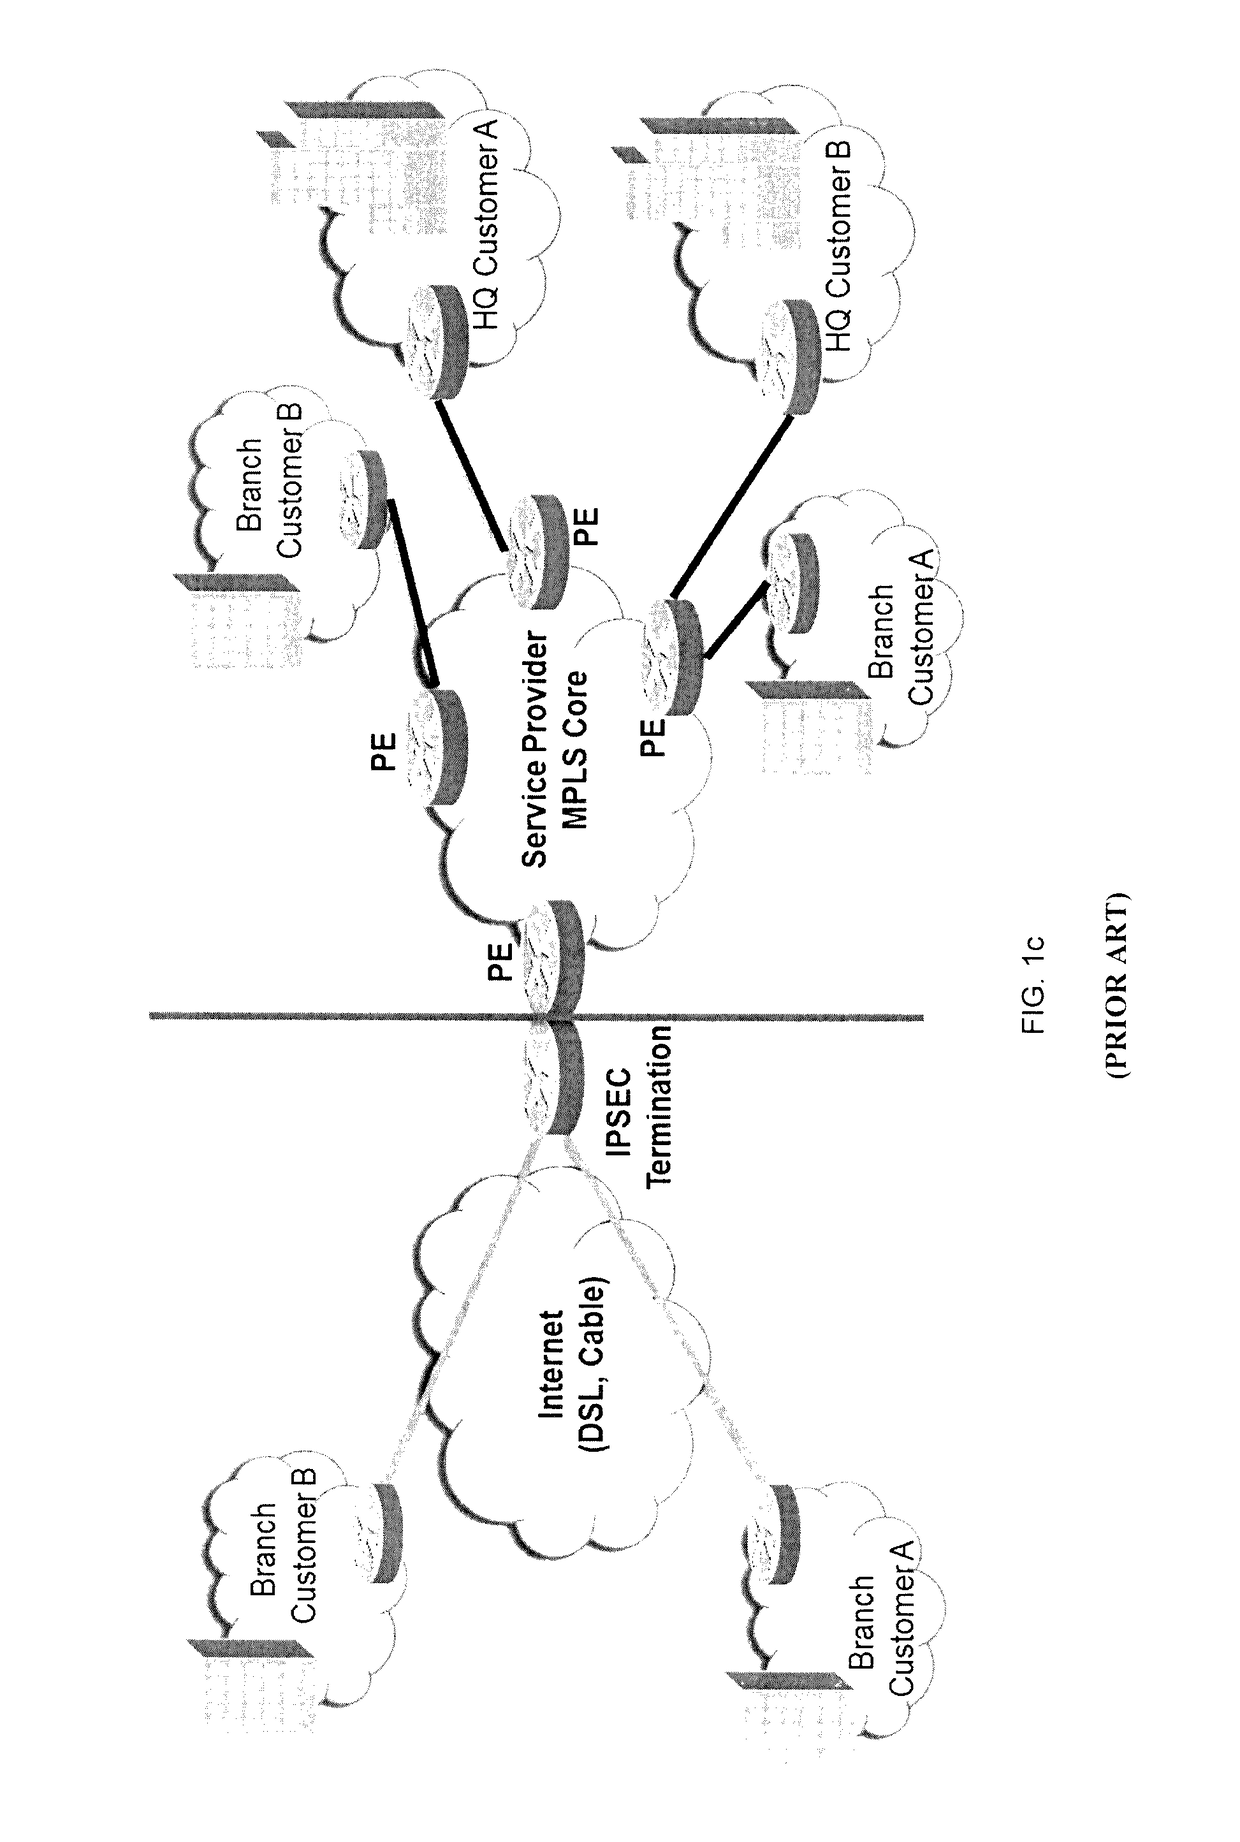 System, apparatus and method for providing a virtual network edge and overlay